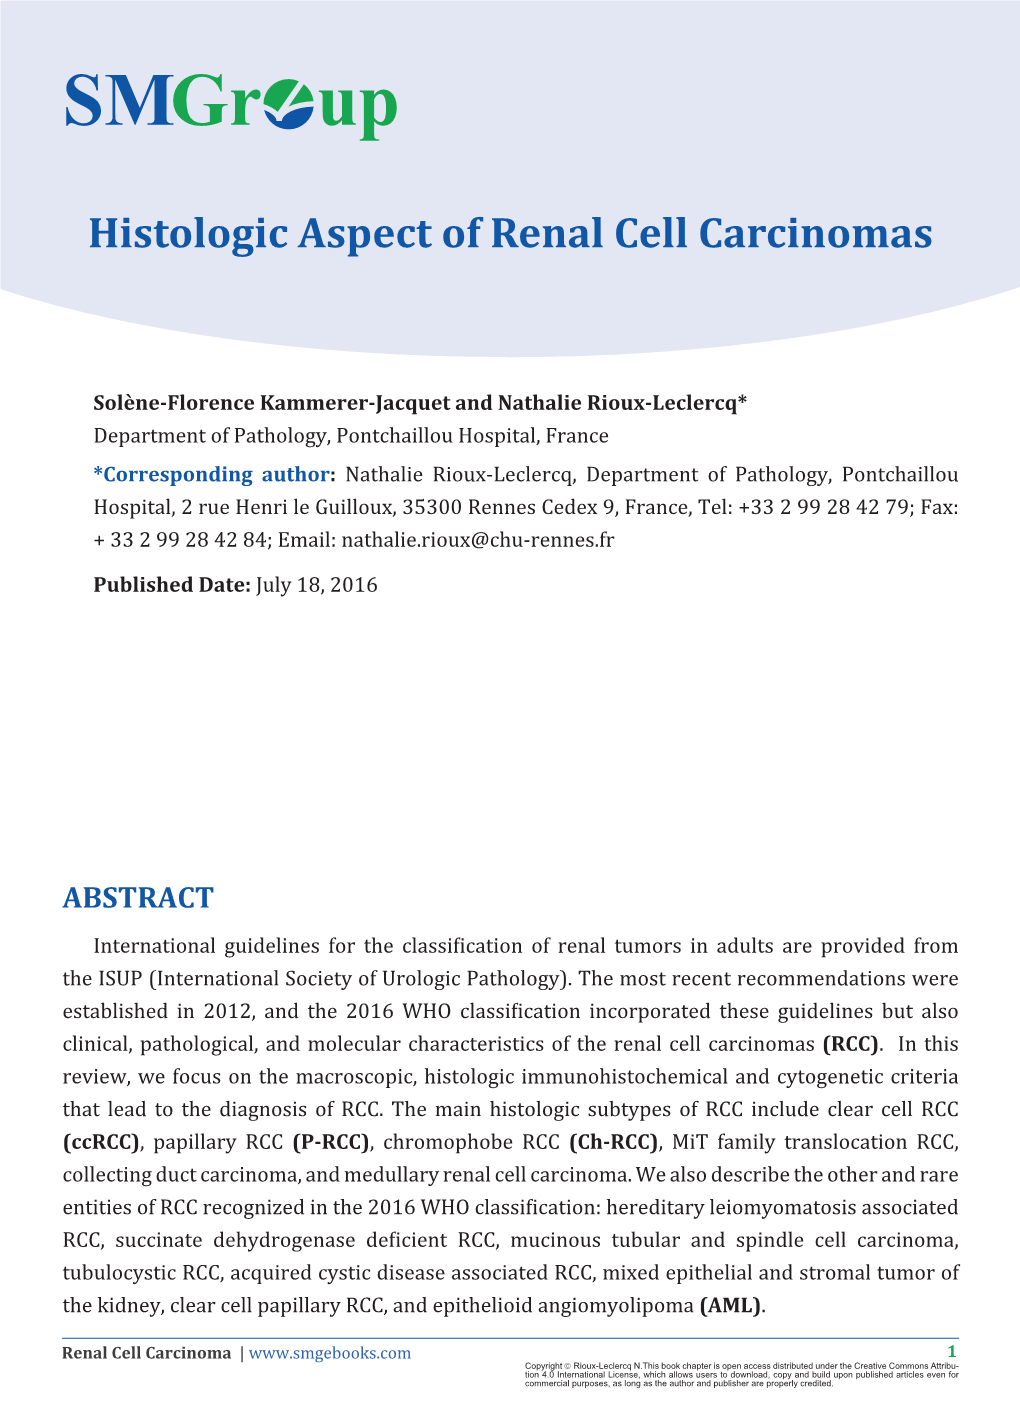 Renal Cell Carcinoma: from a Pathologist's Perspective